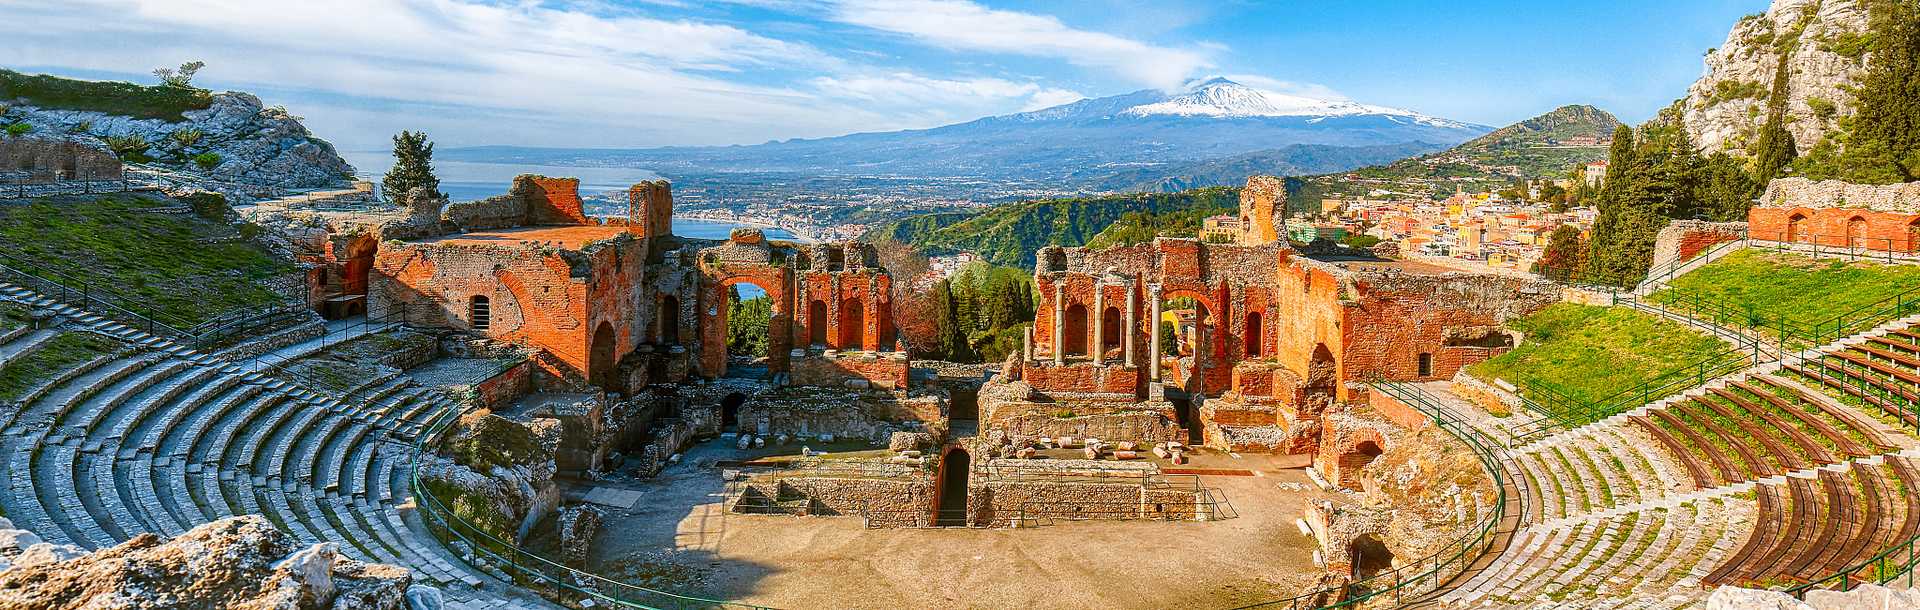 The Ancient theatre of Taormina in Sicily, Italy